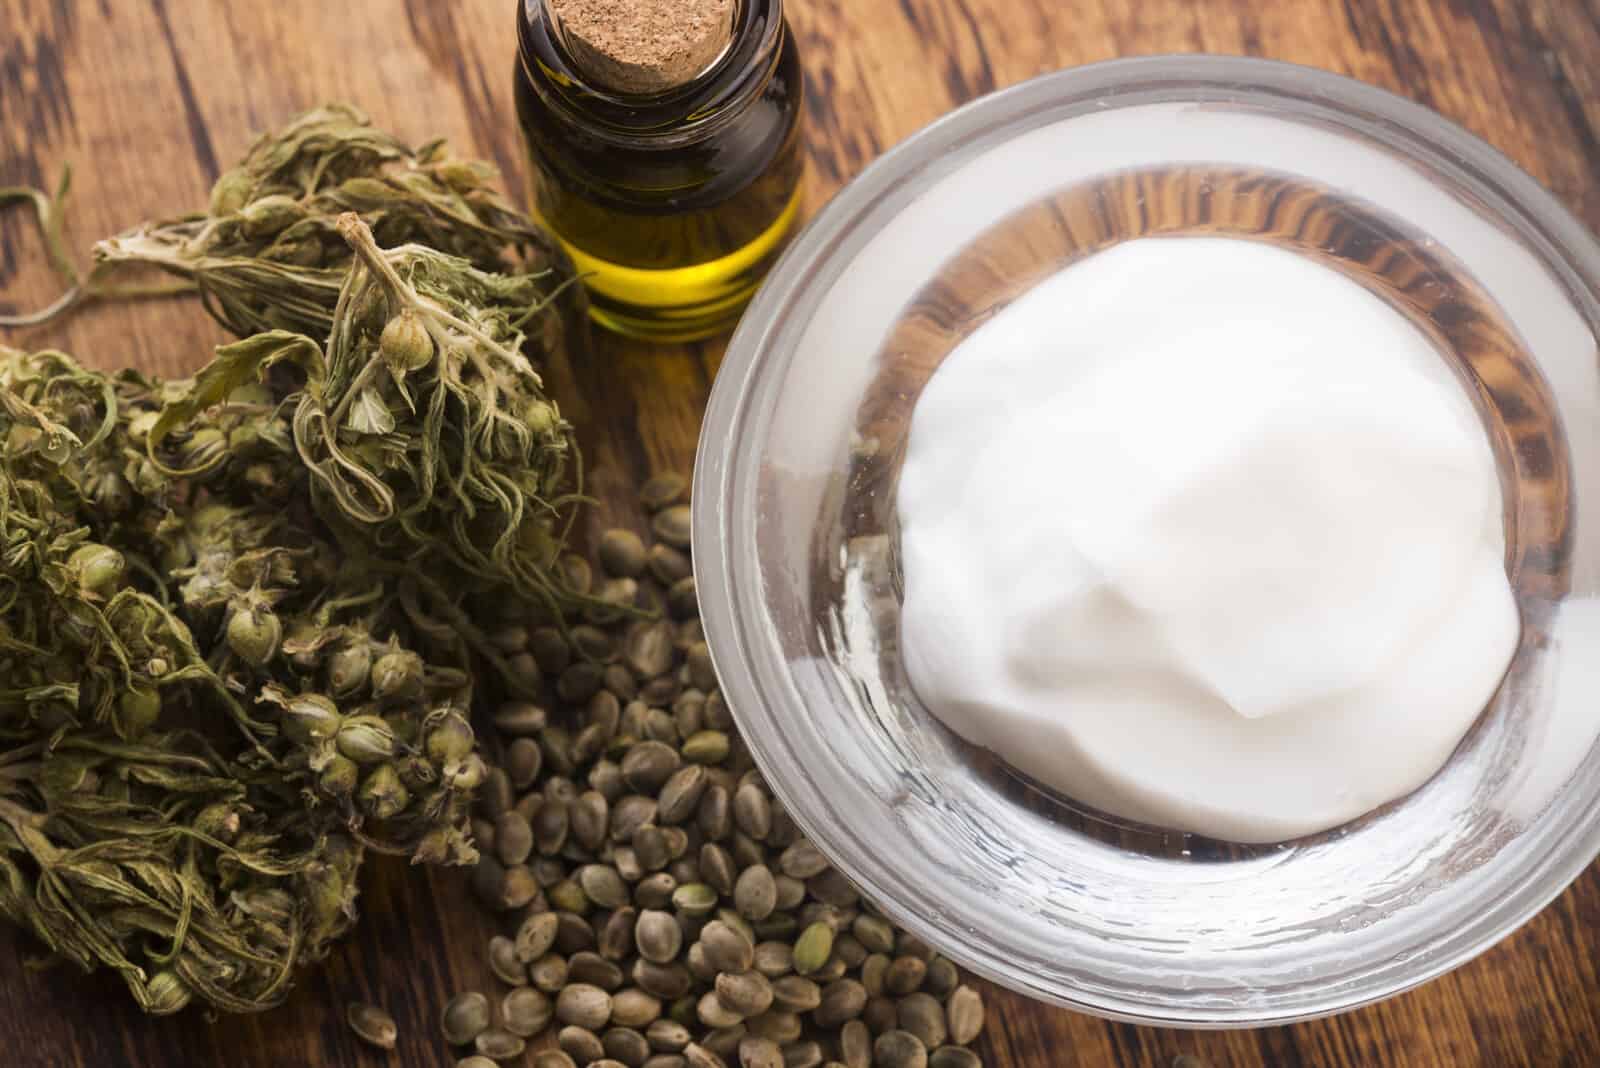 What You Should Know About CBD Cream